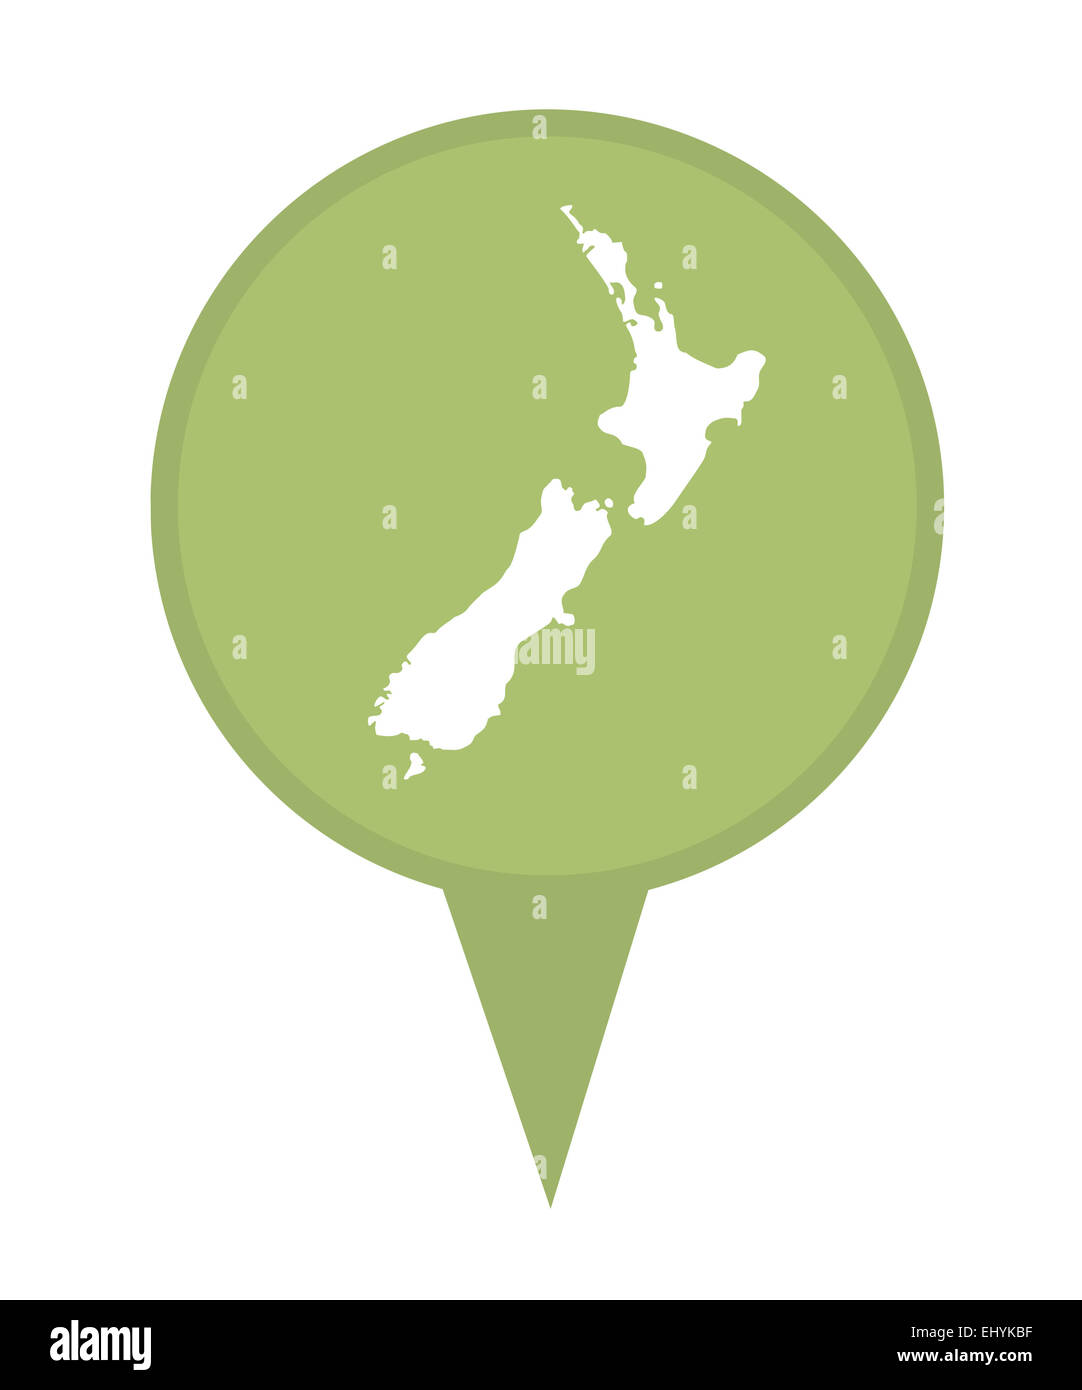 New Zealand map marker pin isolated on a white background. Stock Photo